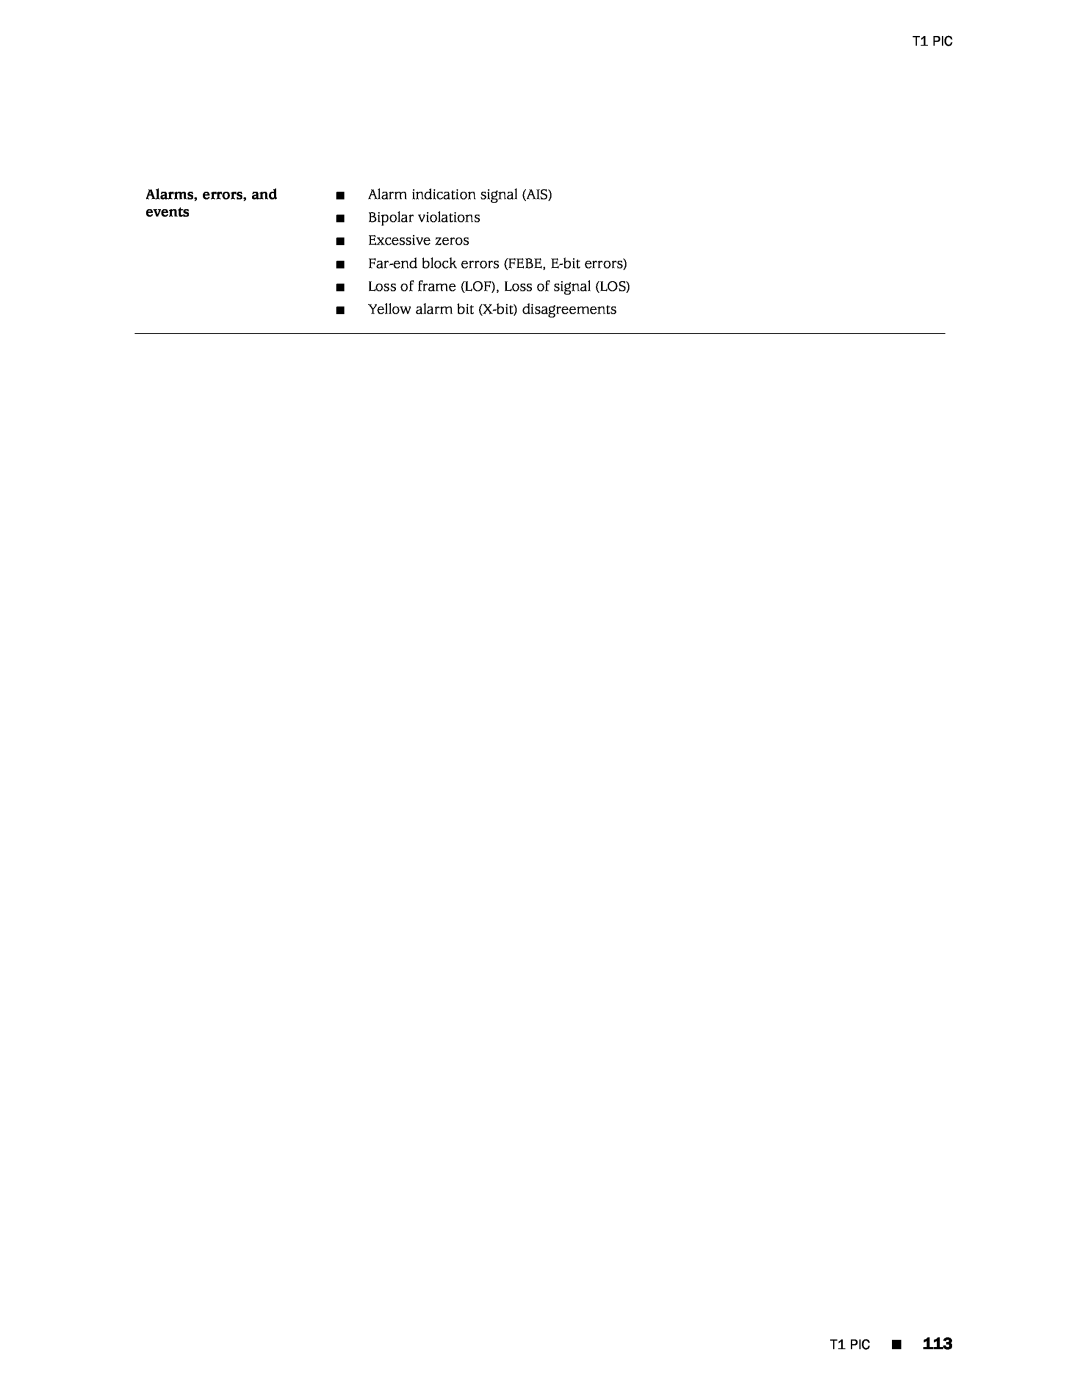 Juniper Networks M120 manual T1 PIC, Alarms, errors, and events 